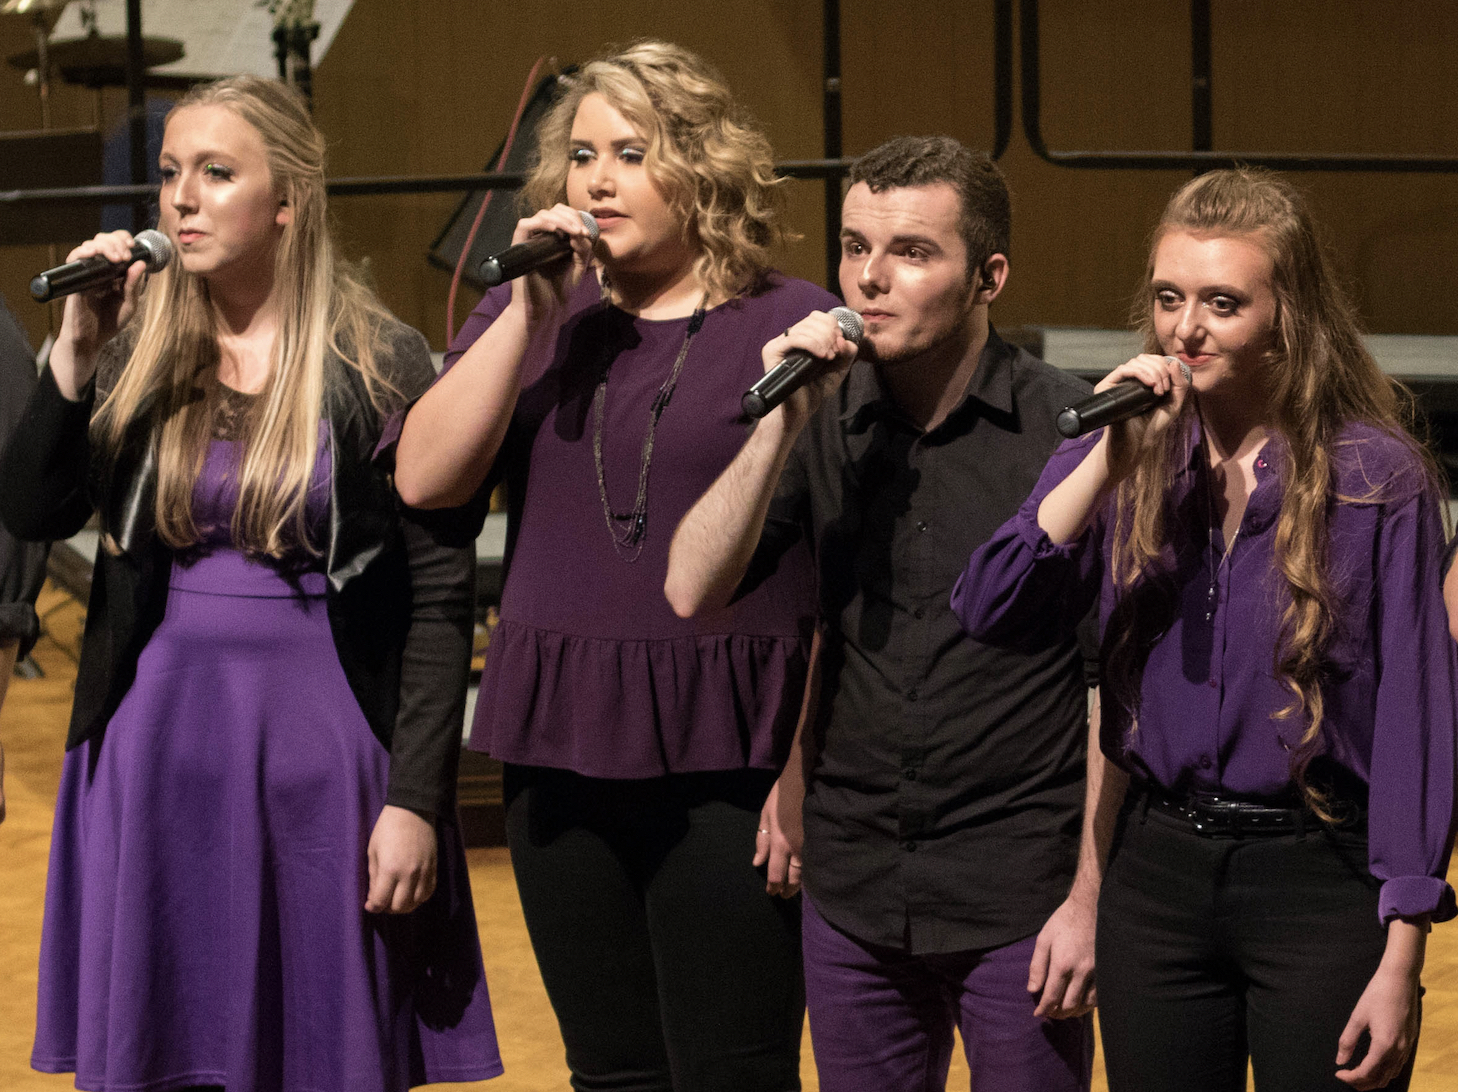 Four singers dressed in purple and black